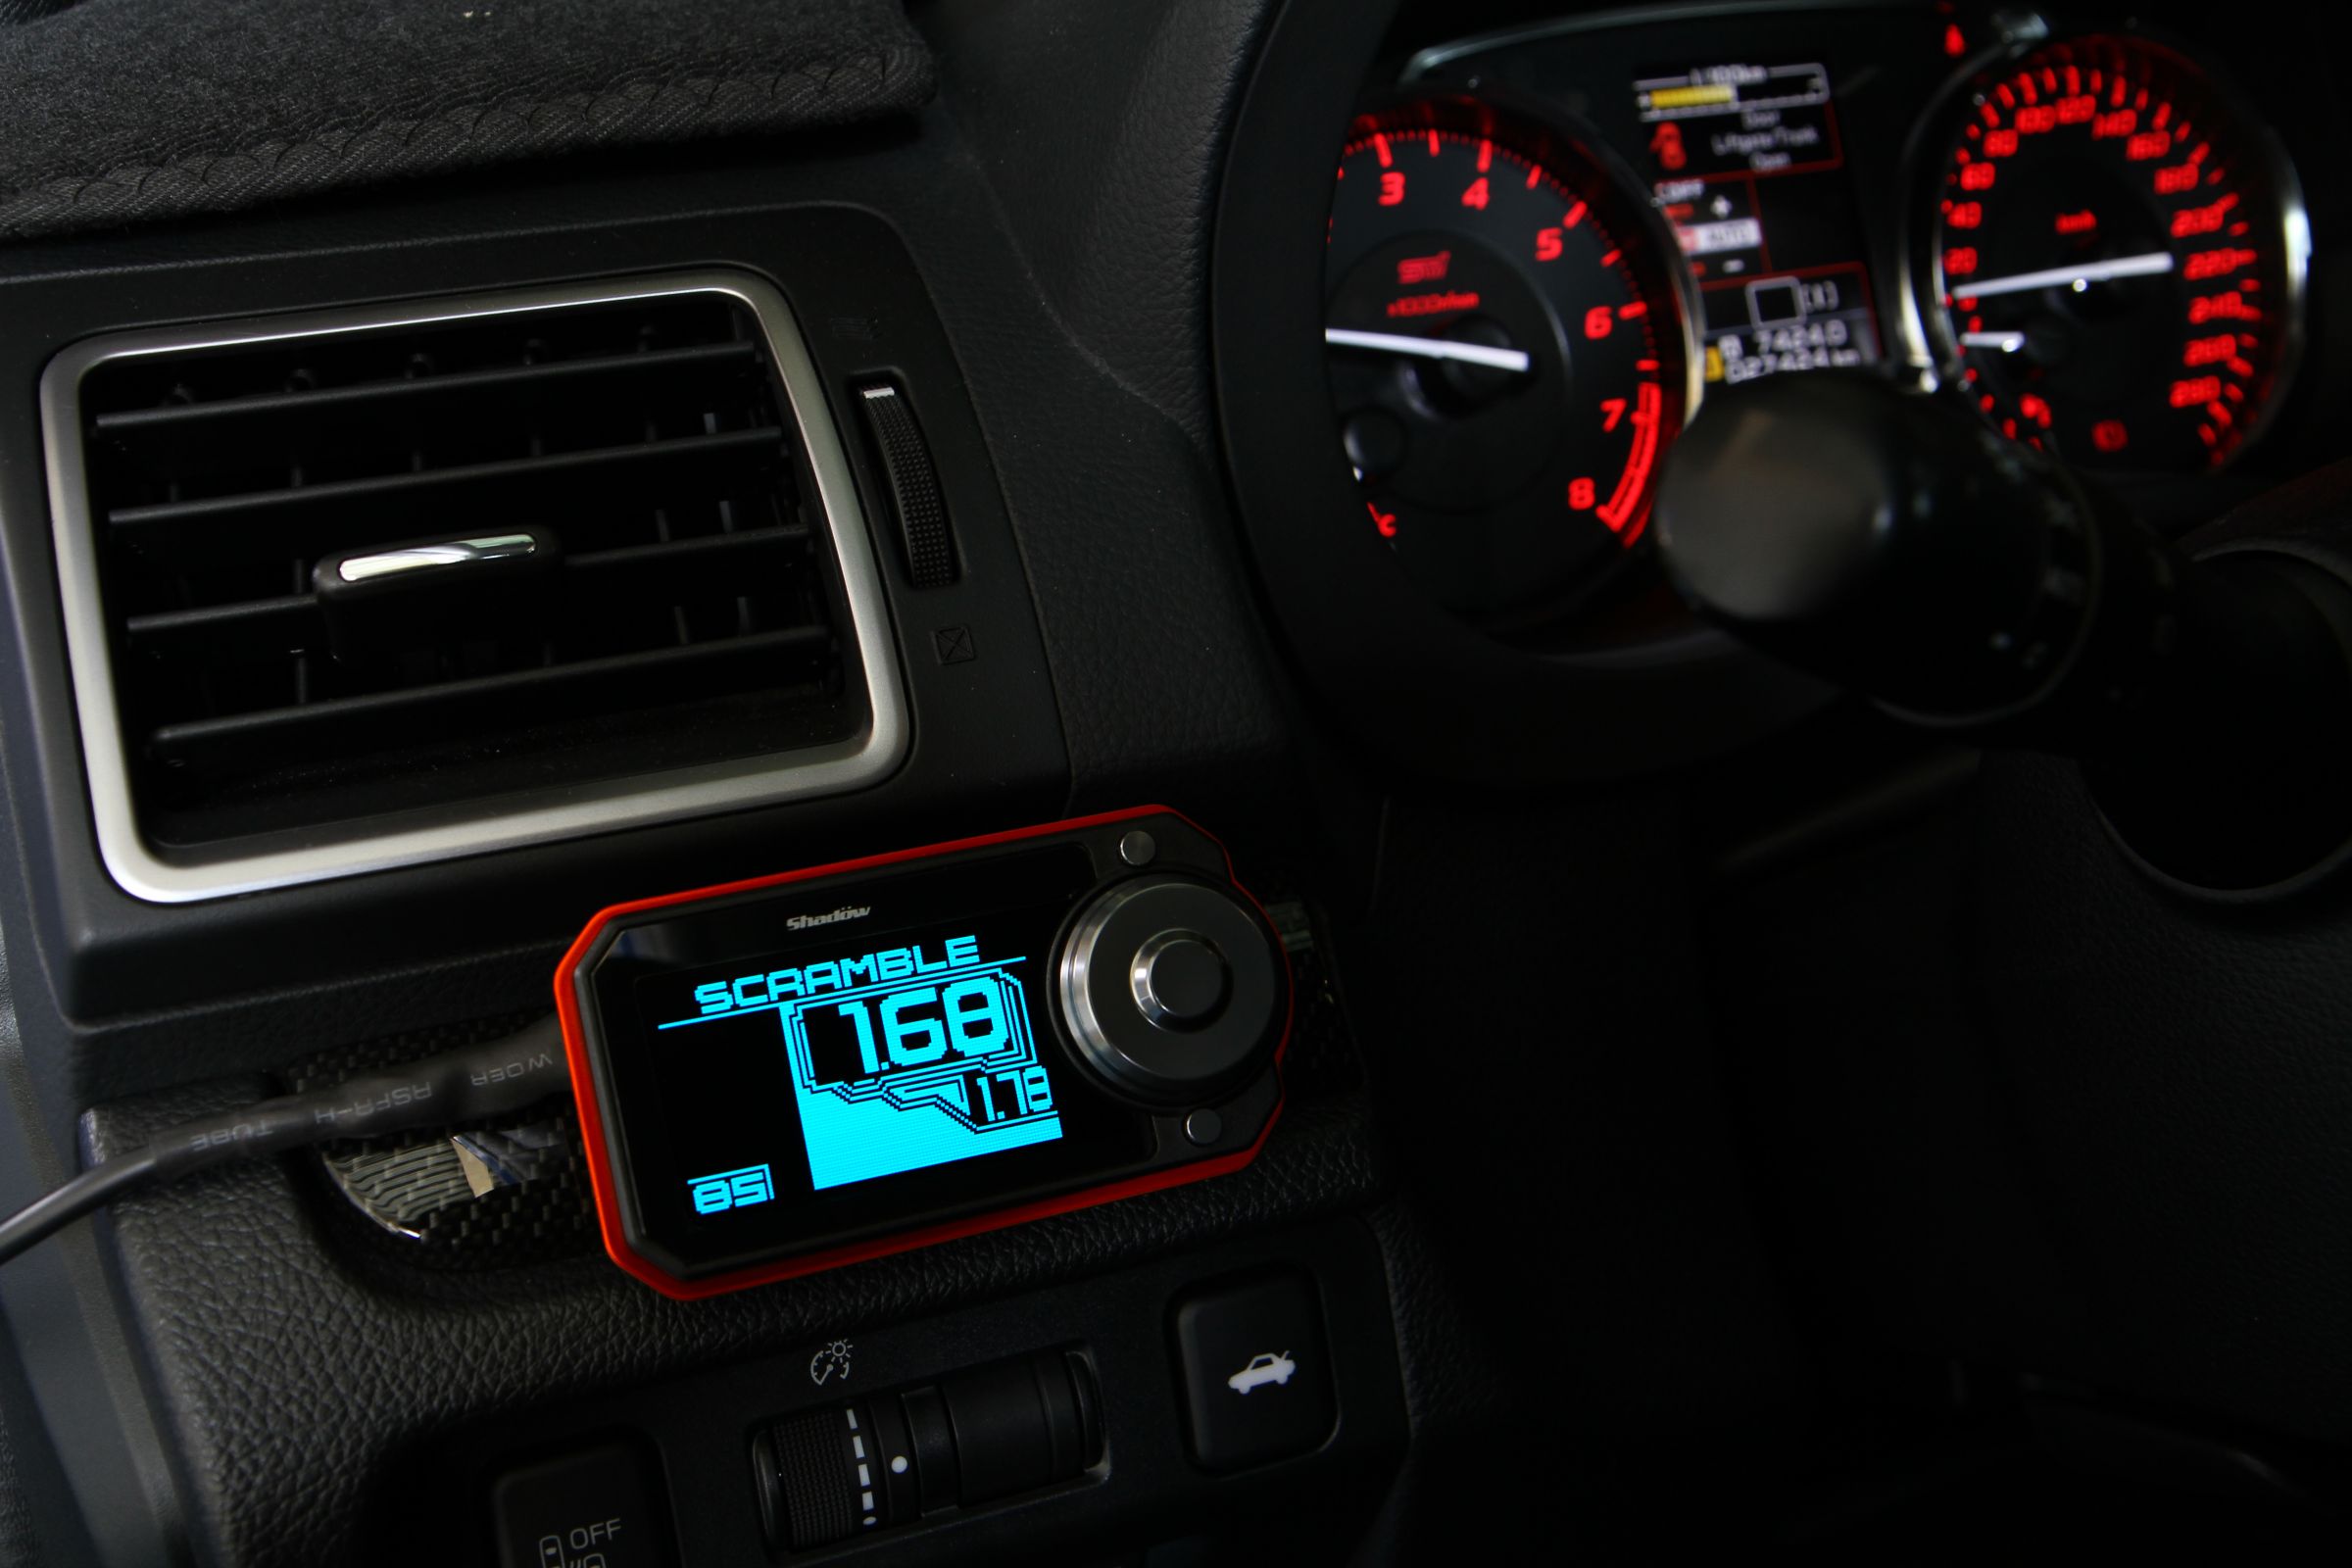 Shadow digital electronic boost controller monitors turbo operation status and has a built-in forced pressure relief mechanism to protect the turbo.